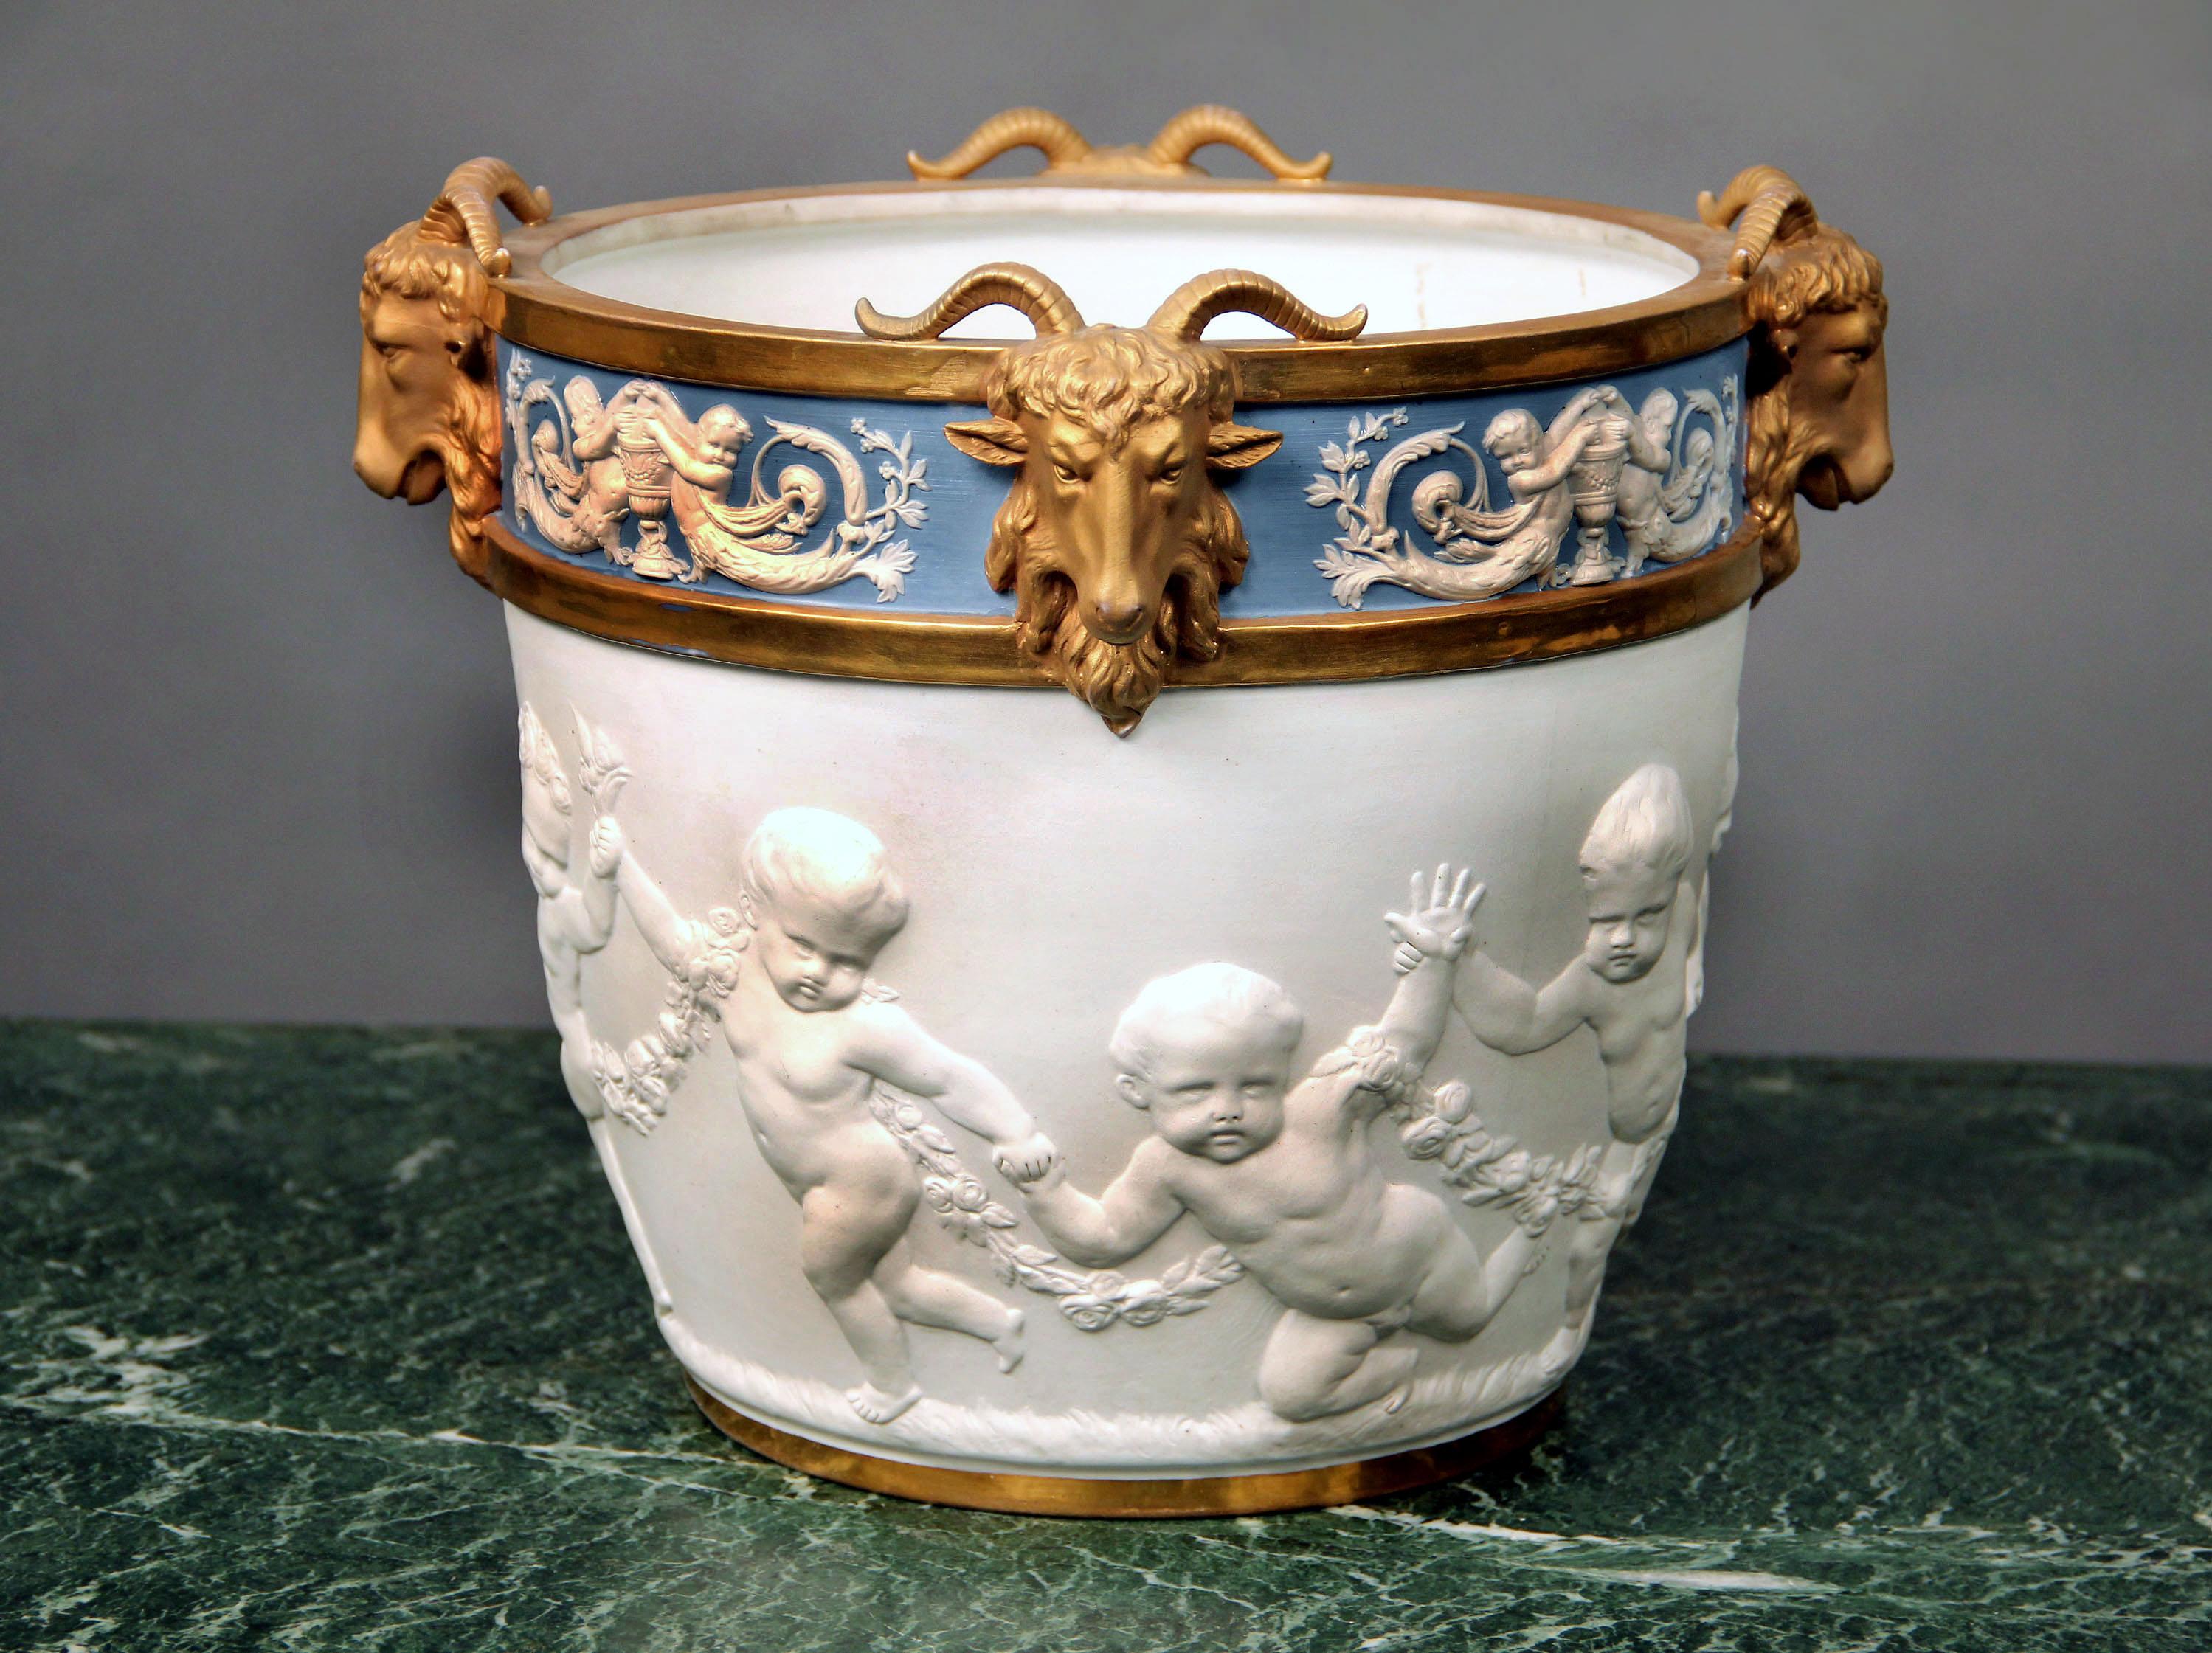 A fine quality late 19th century Dresden parcel-gilt and biscuit porcelain jardinière.

The border moulded with cherubs and applied with rams’ heads above a relief of putti with garlands of flowers.